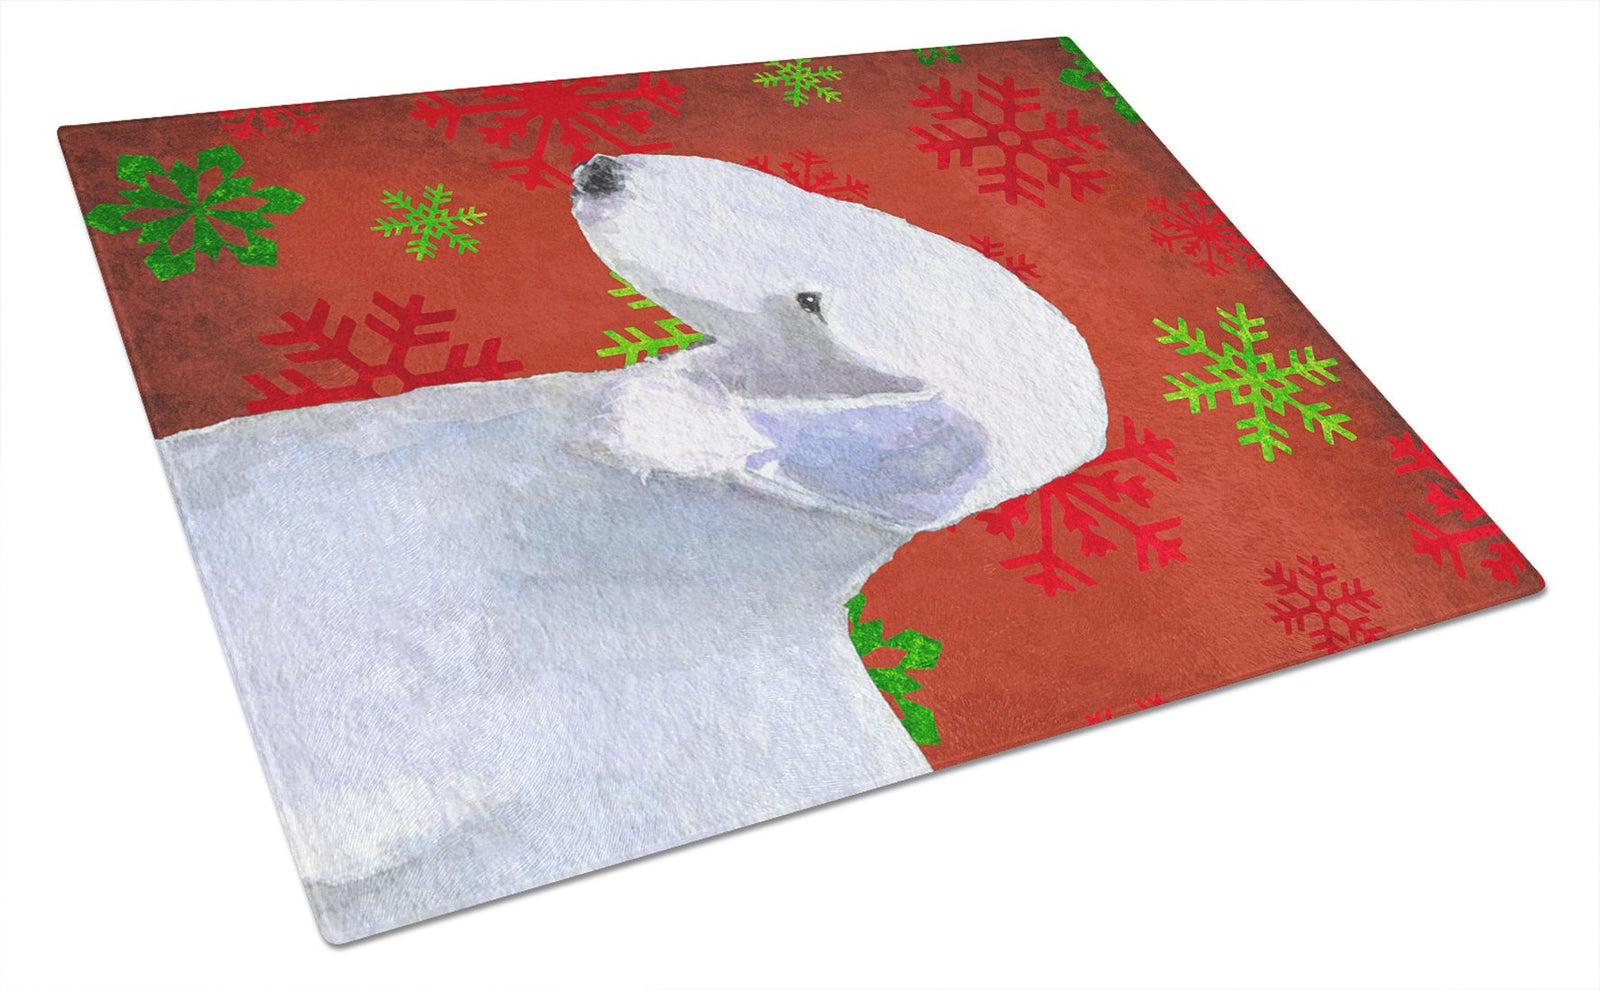 Bedlington Terrier Red and Green Snowflakes Christmas Glass Cutting Board Large by Caroline's Treasures